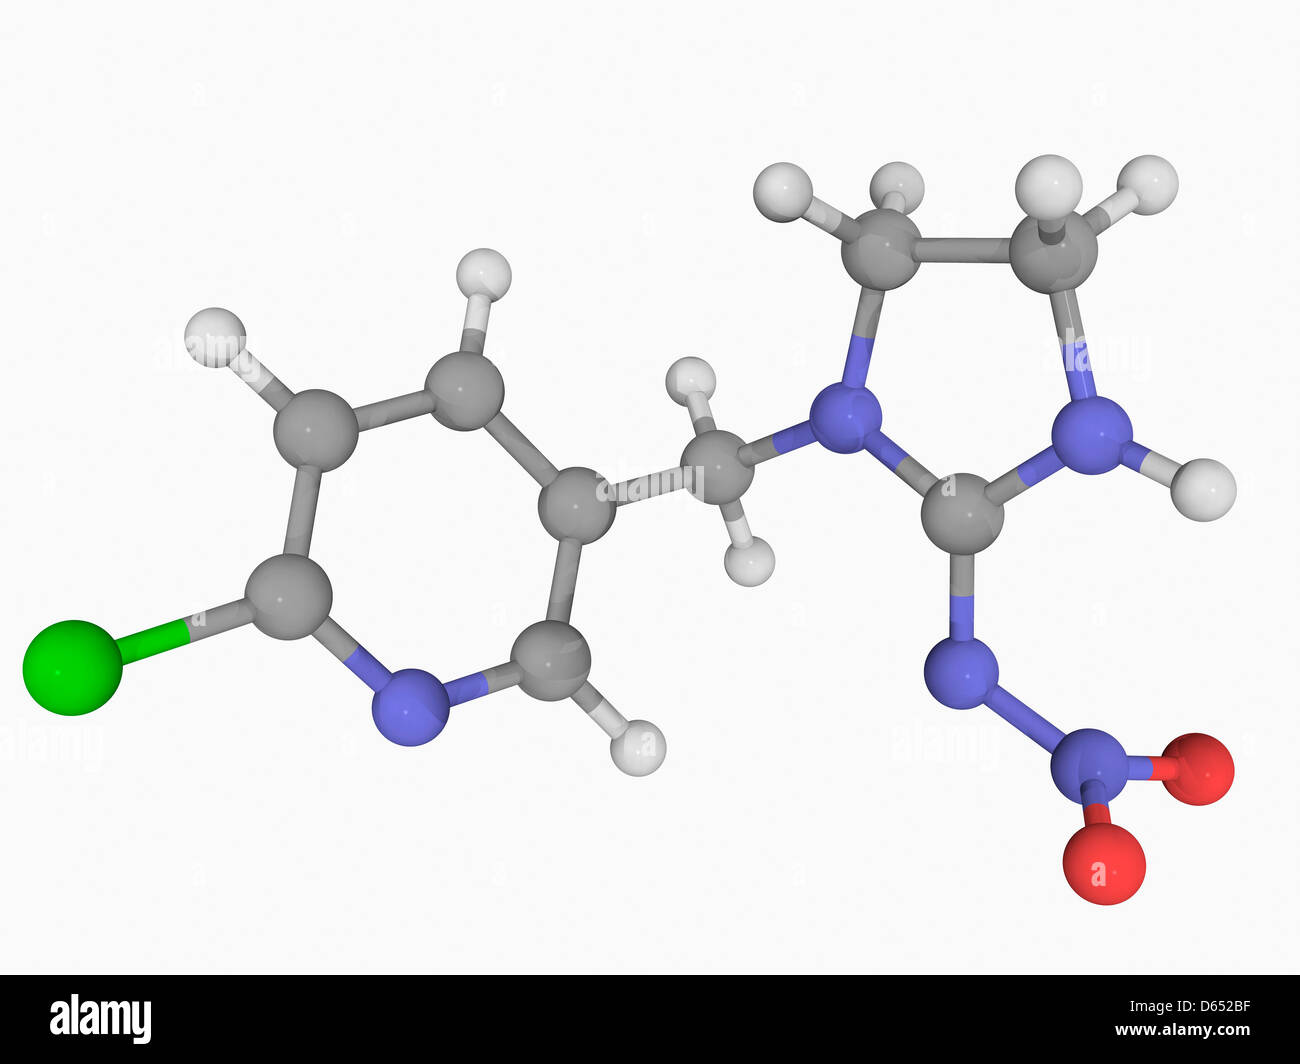 Imidacloprid insecticide molecule Stock Photo